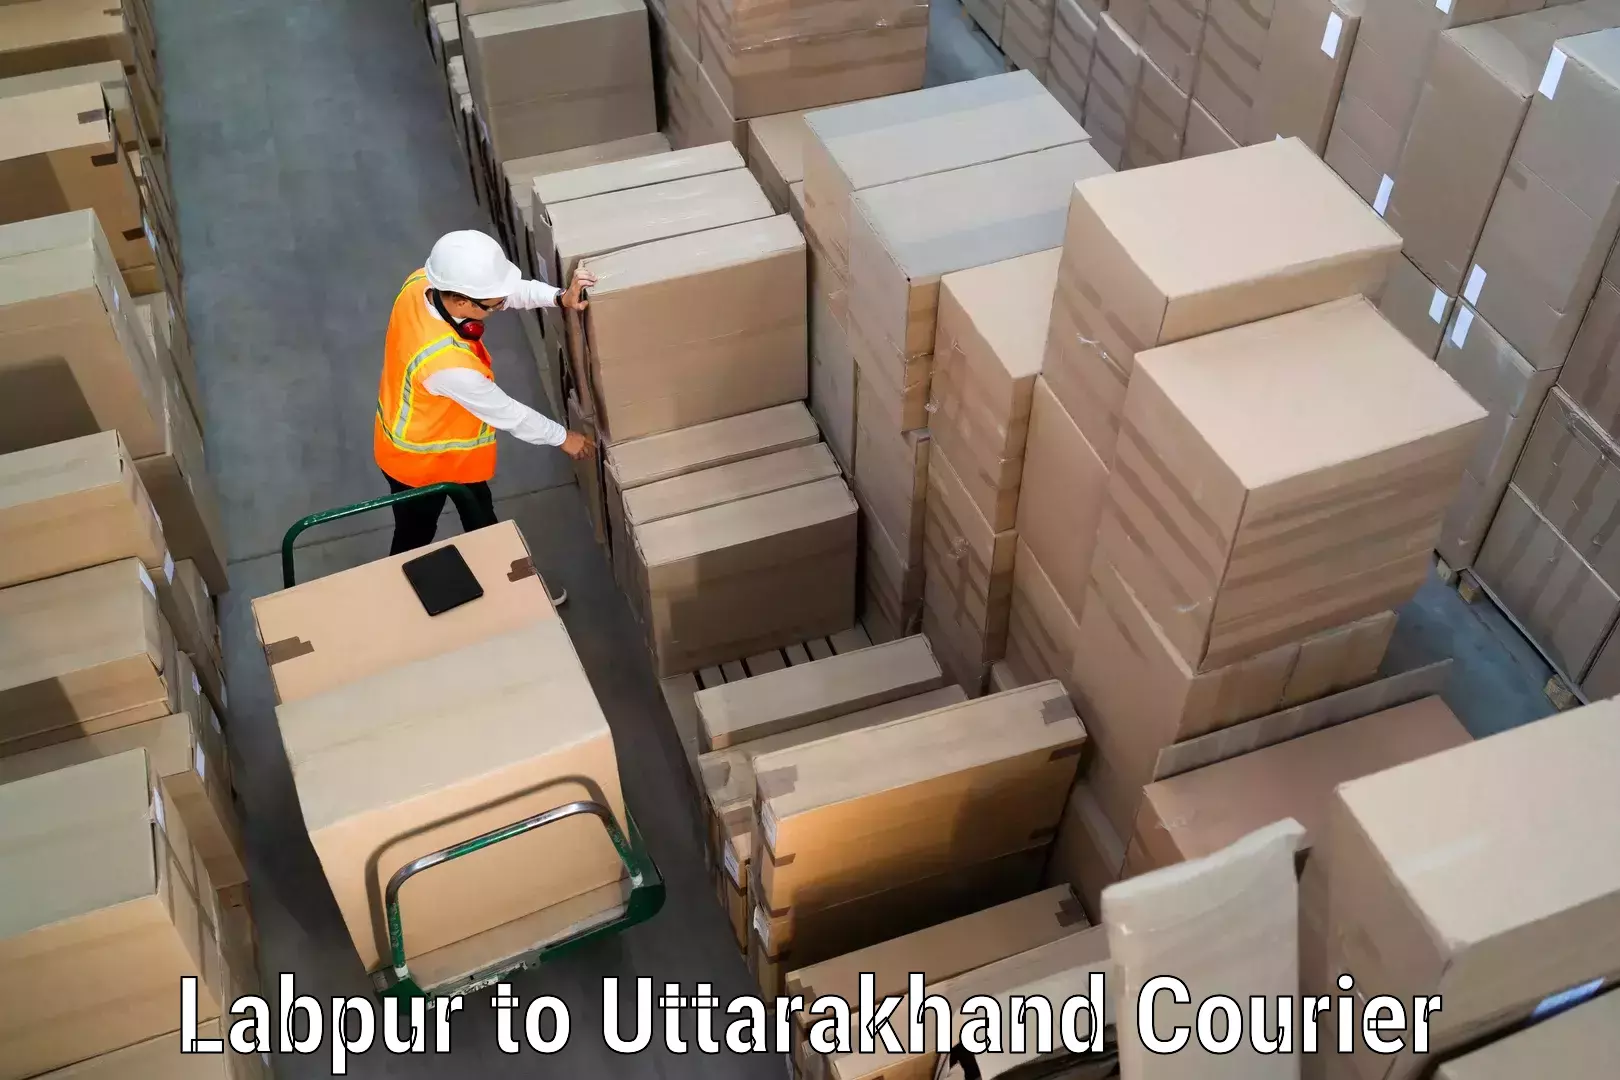 Courier services Labpur to Pauri